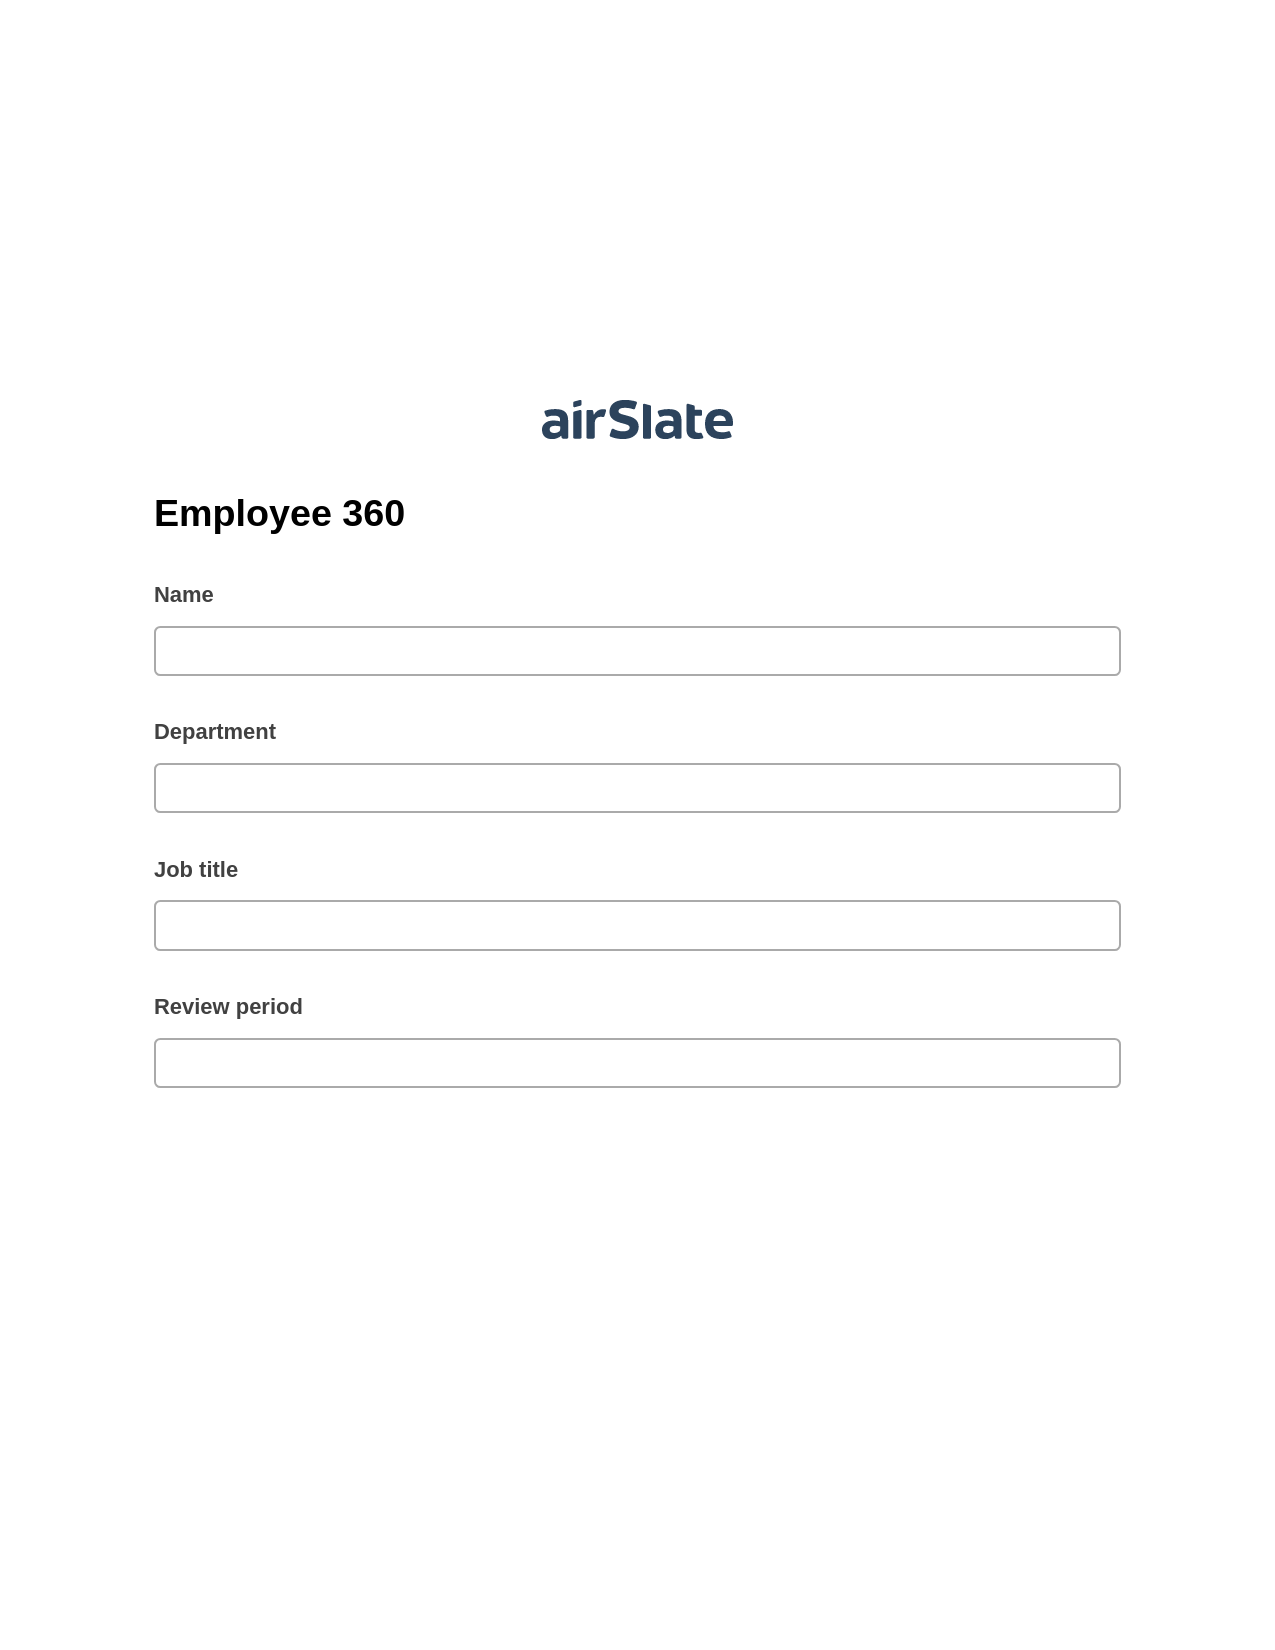 Multirole Employee 360 Pre-fill from MS Dynamics 365 Records, Create MS Dynamics 365 Records Bot, Export to Google Sheet Bot